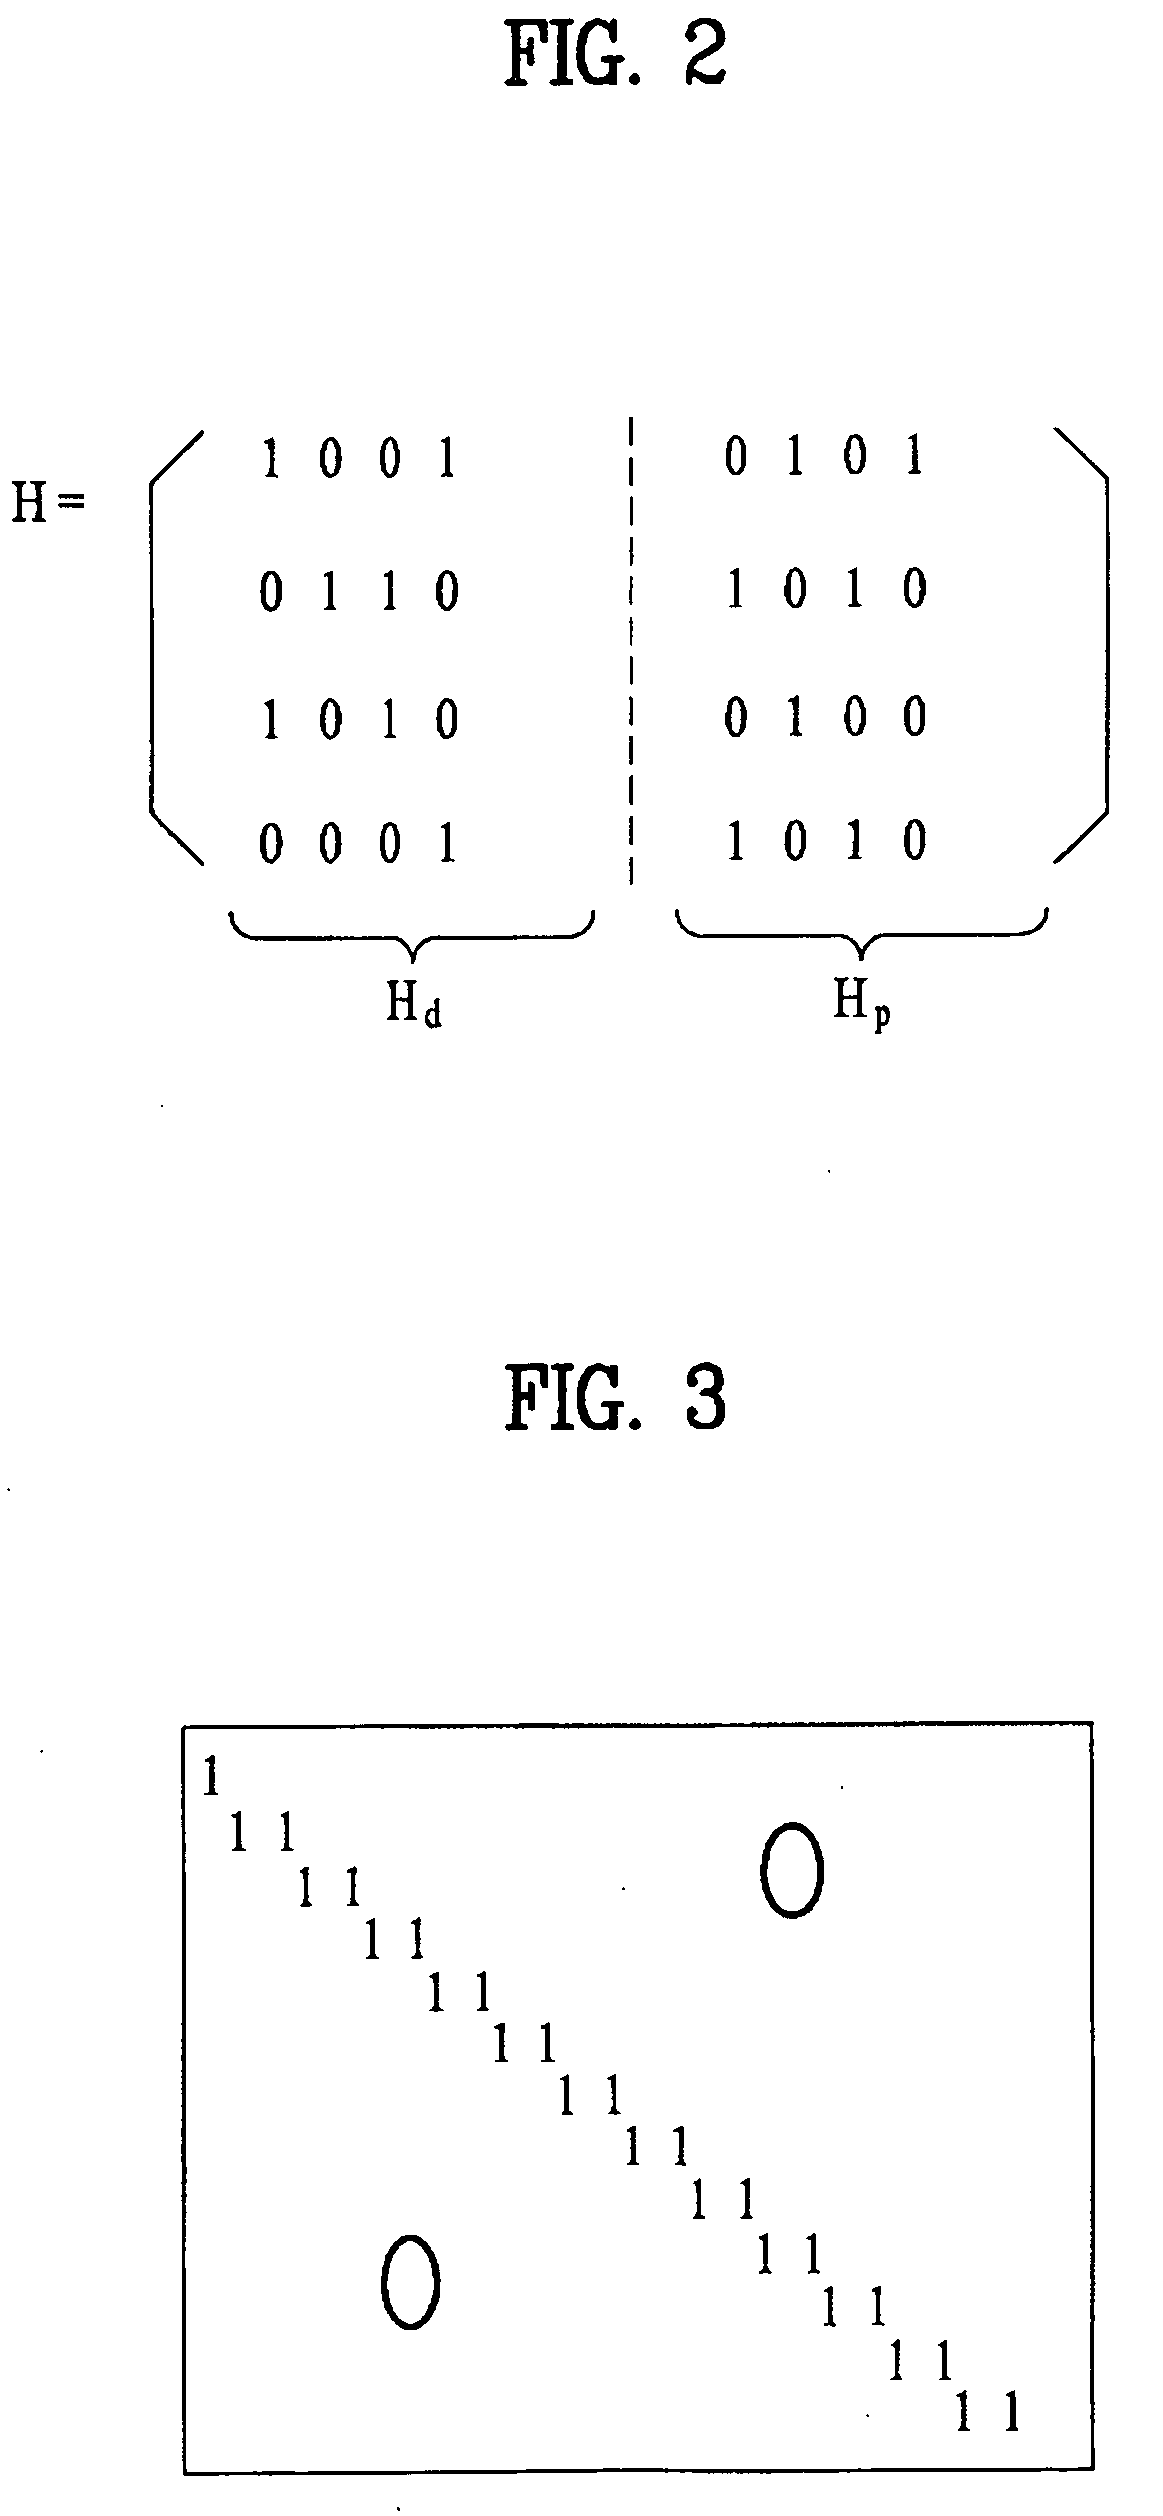 Method and apparatus of encoding and decoding data using low density parity check code in a wireless communication system